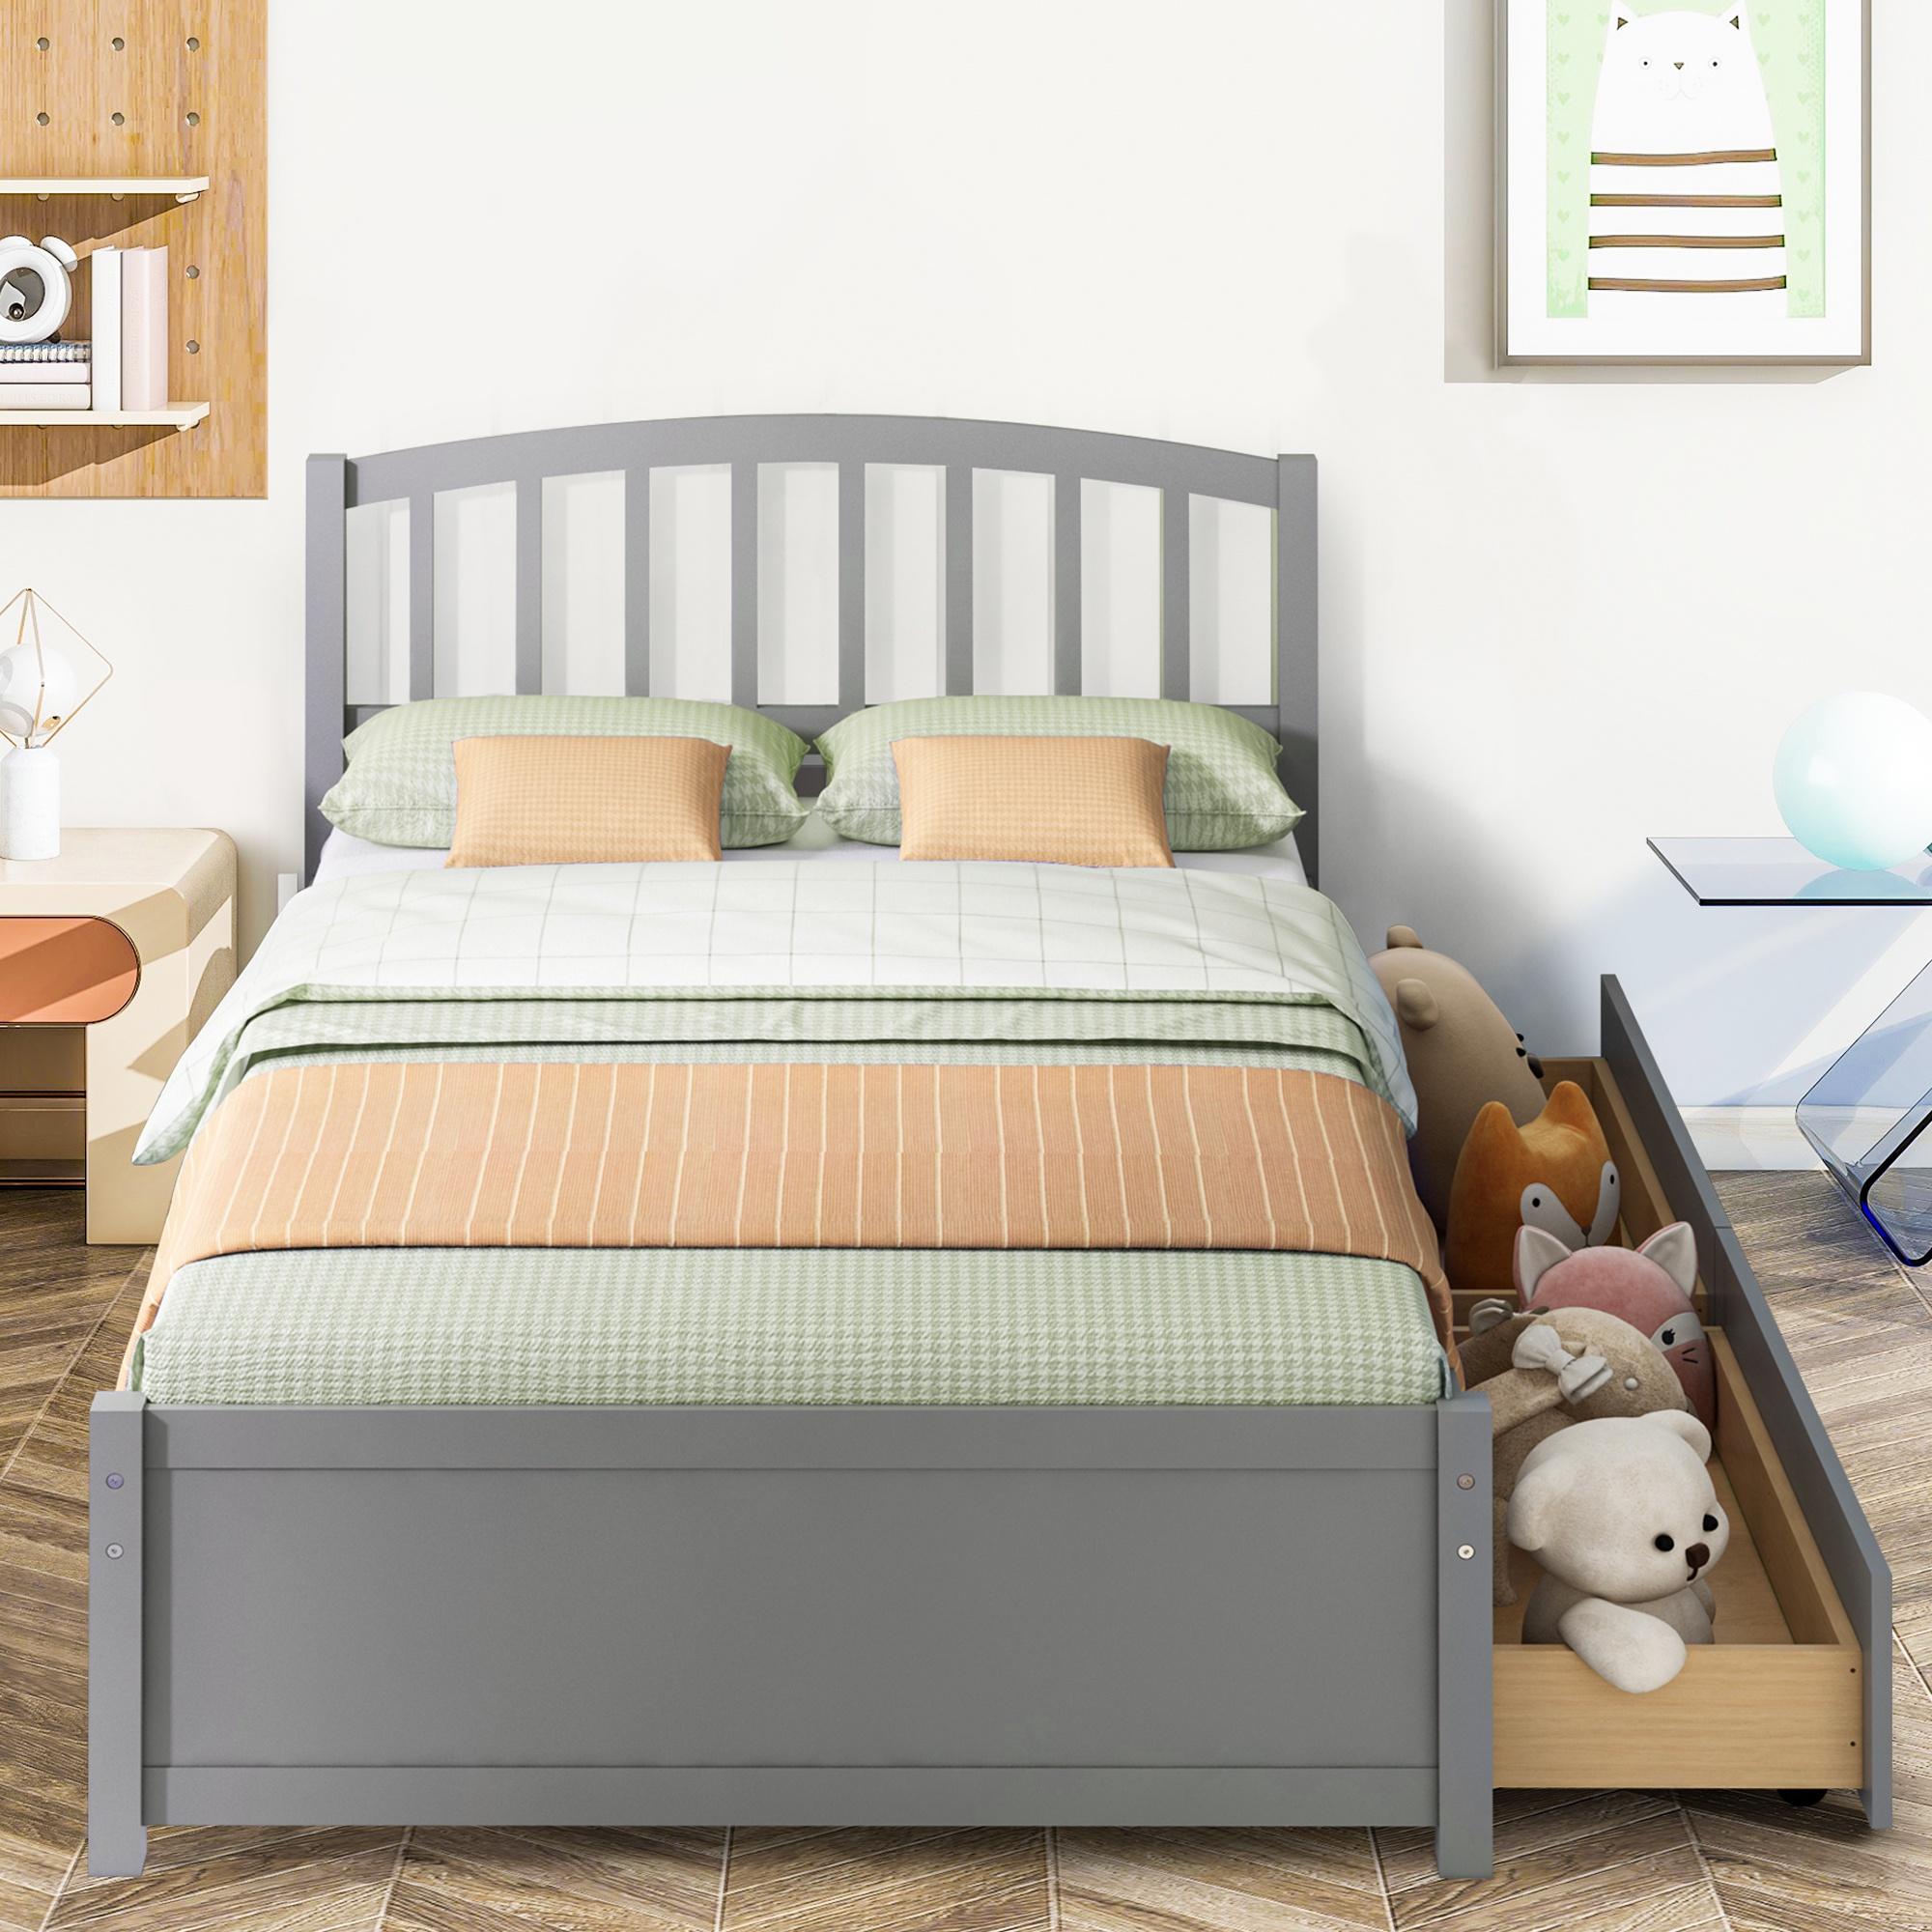 PAPROOS Wood Platform Bed with Storage, Twin Size Bed Frame with 2 Drawers, No Box Spring Needed, Gray - image 1 of 11